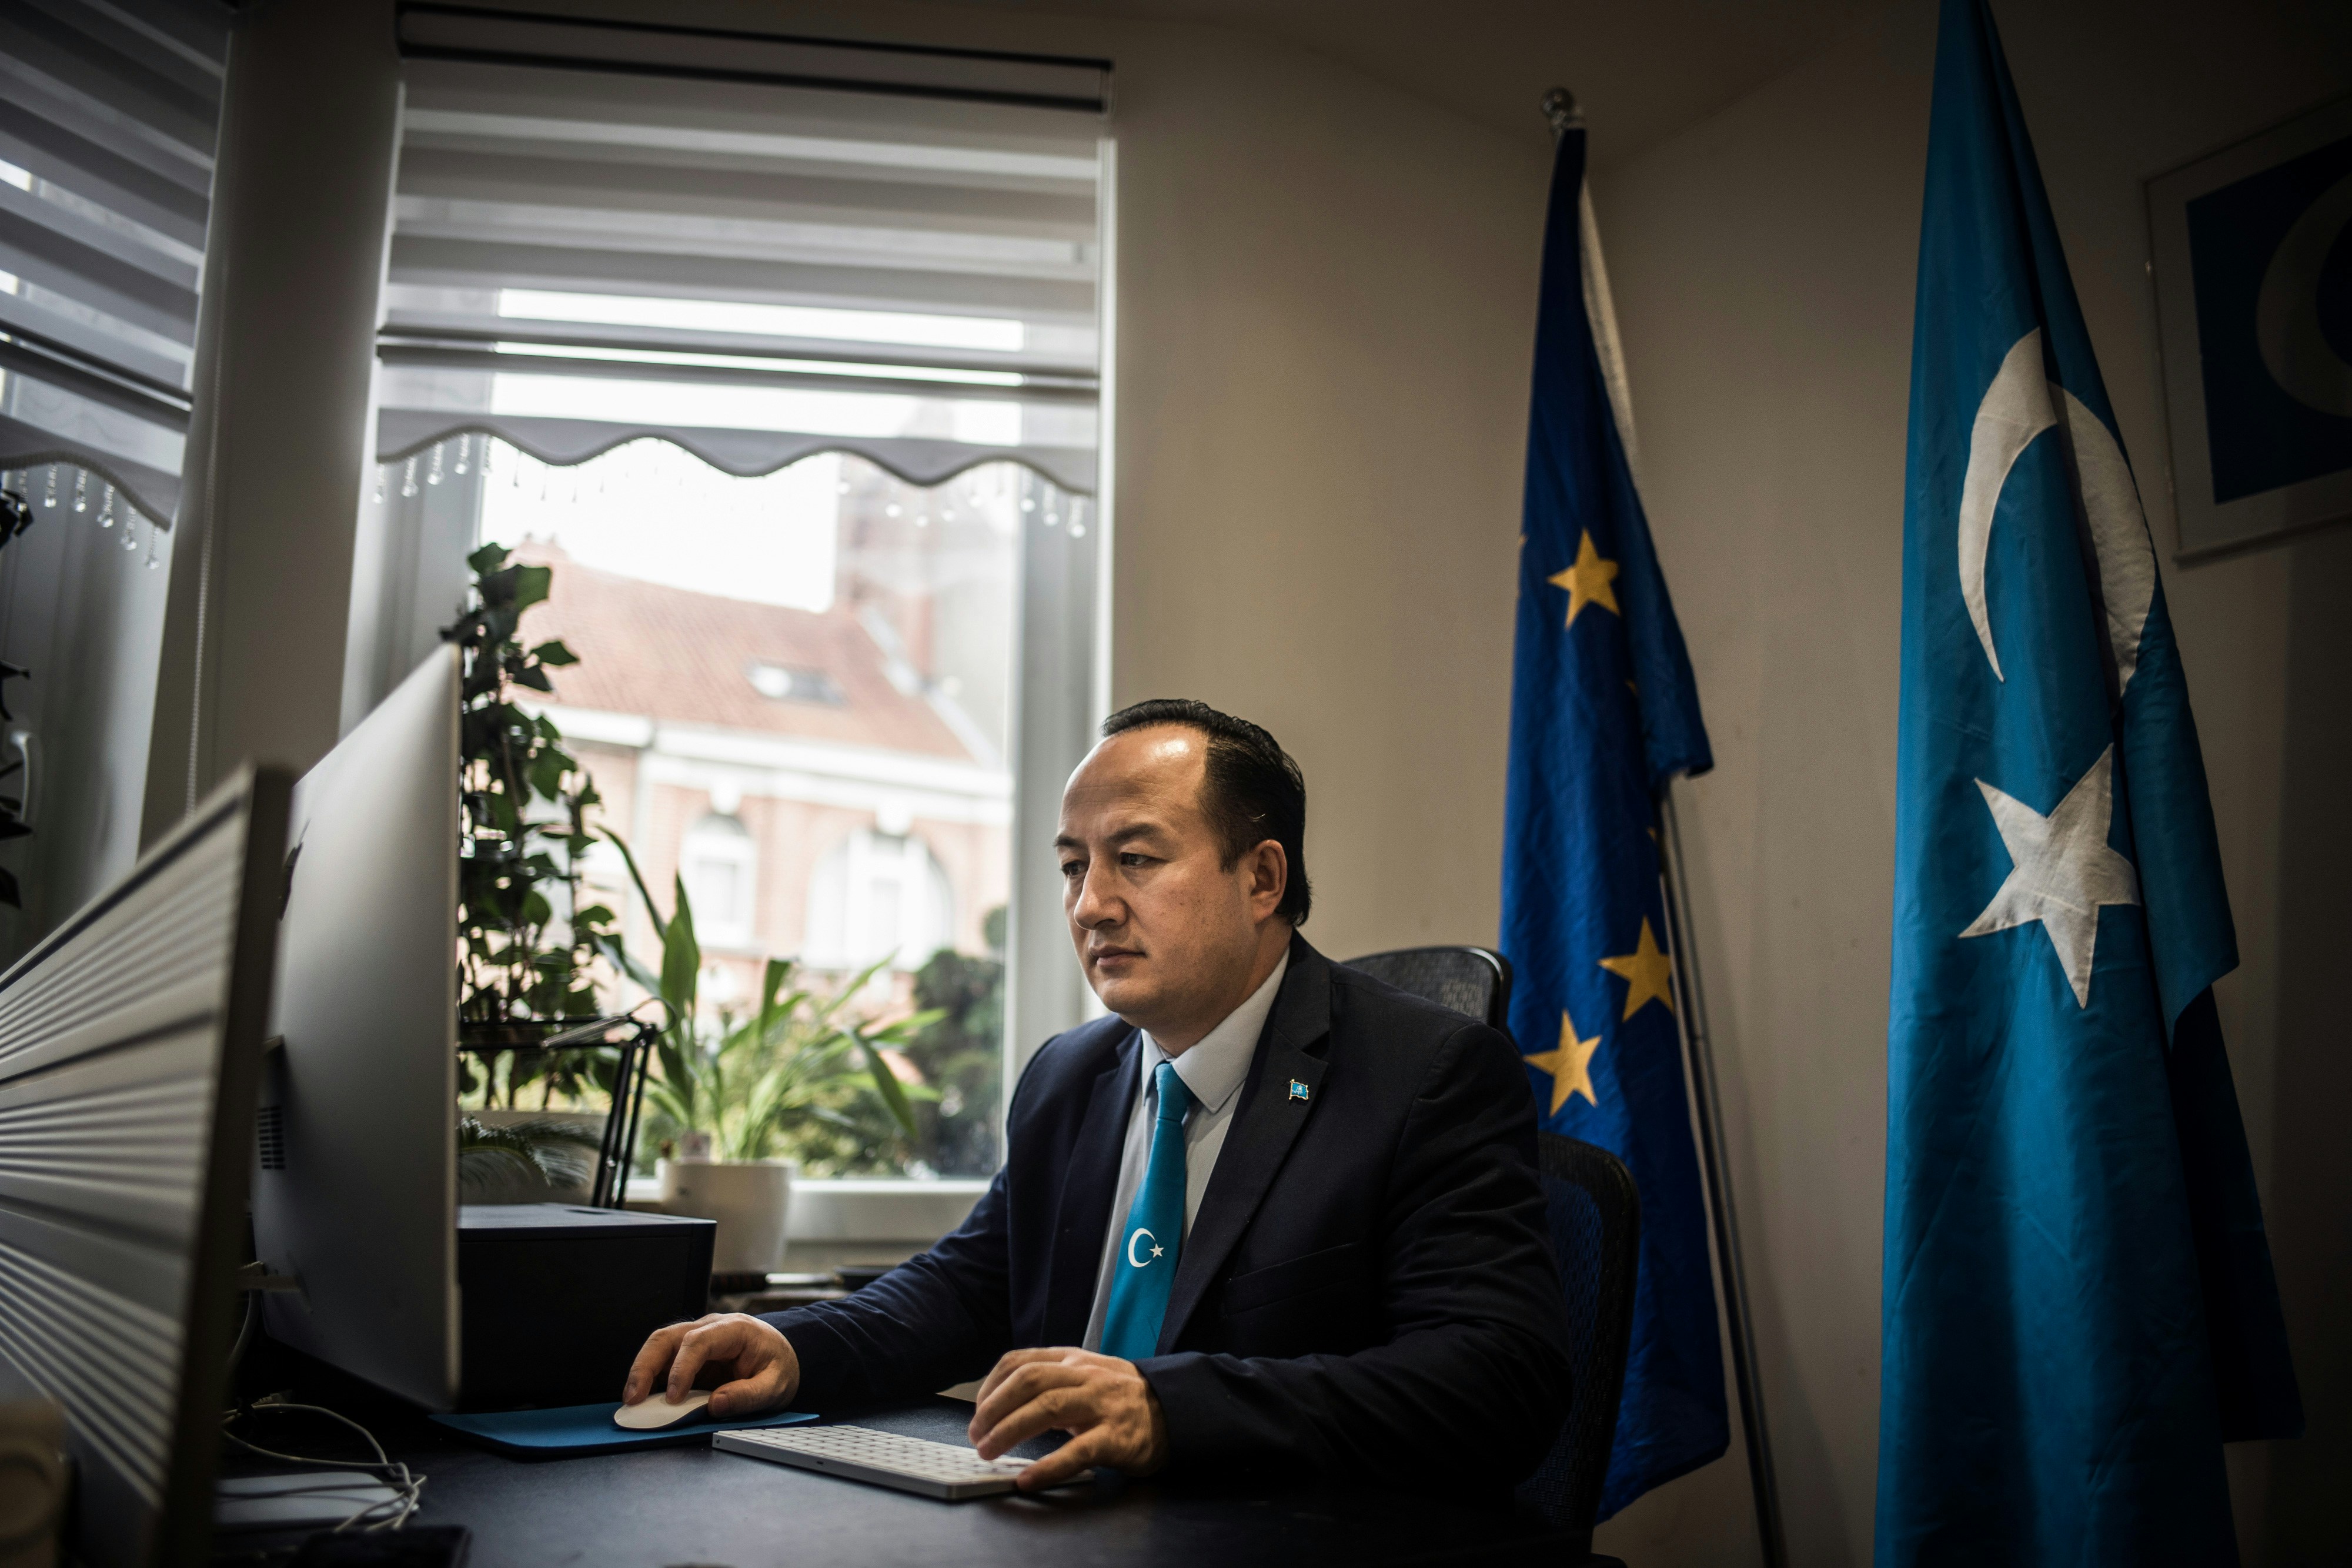 Nejmiddin Qarluq, an ethnic Uyghur, and political activist who fled china and was given asylum in Belgium is pictured at his new home in Bruxelles on Jan. 21, 2021.